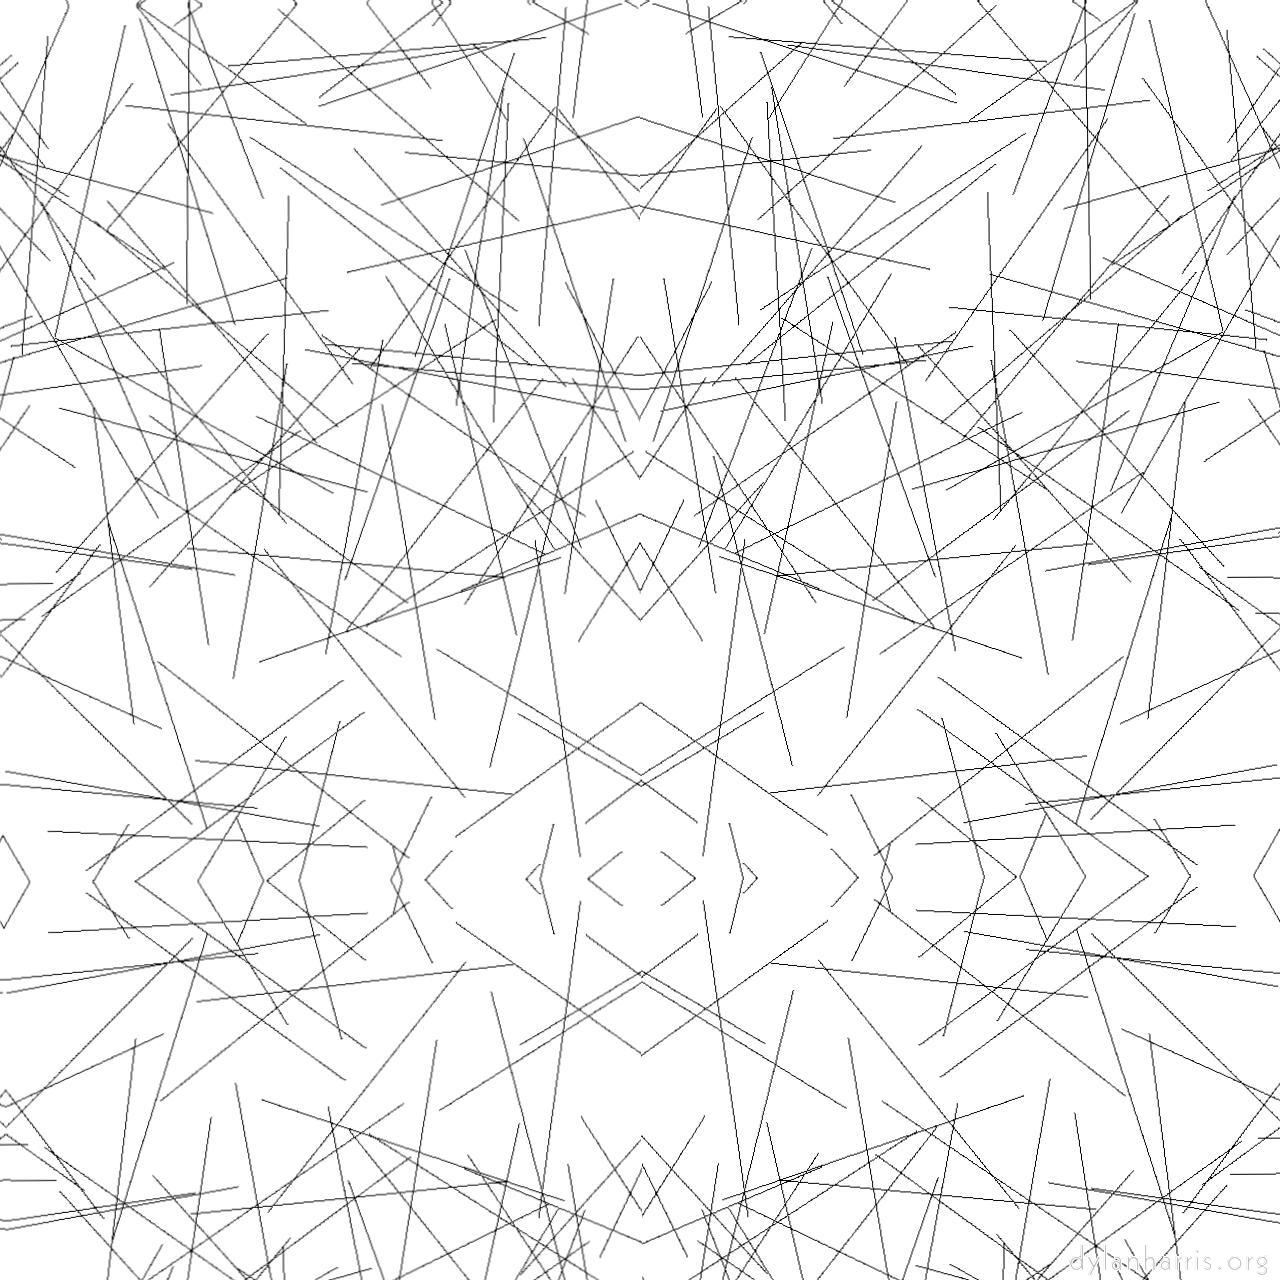 storage presets :: abstract line drawing 2